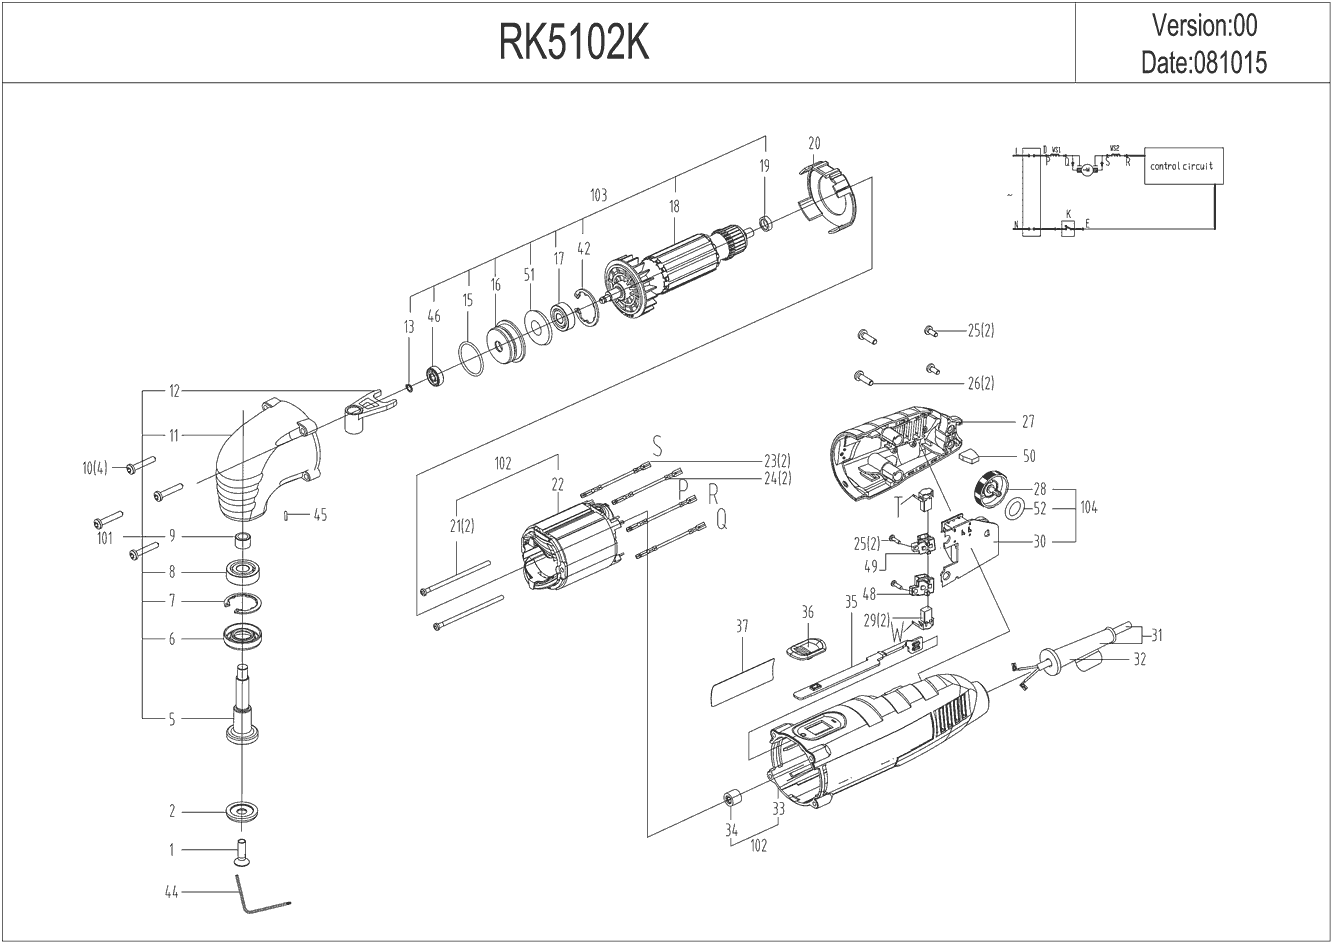 Rockwell RK5102K Parts - Sonicrafter